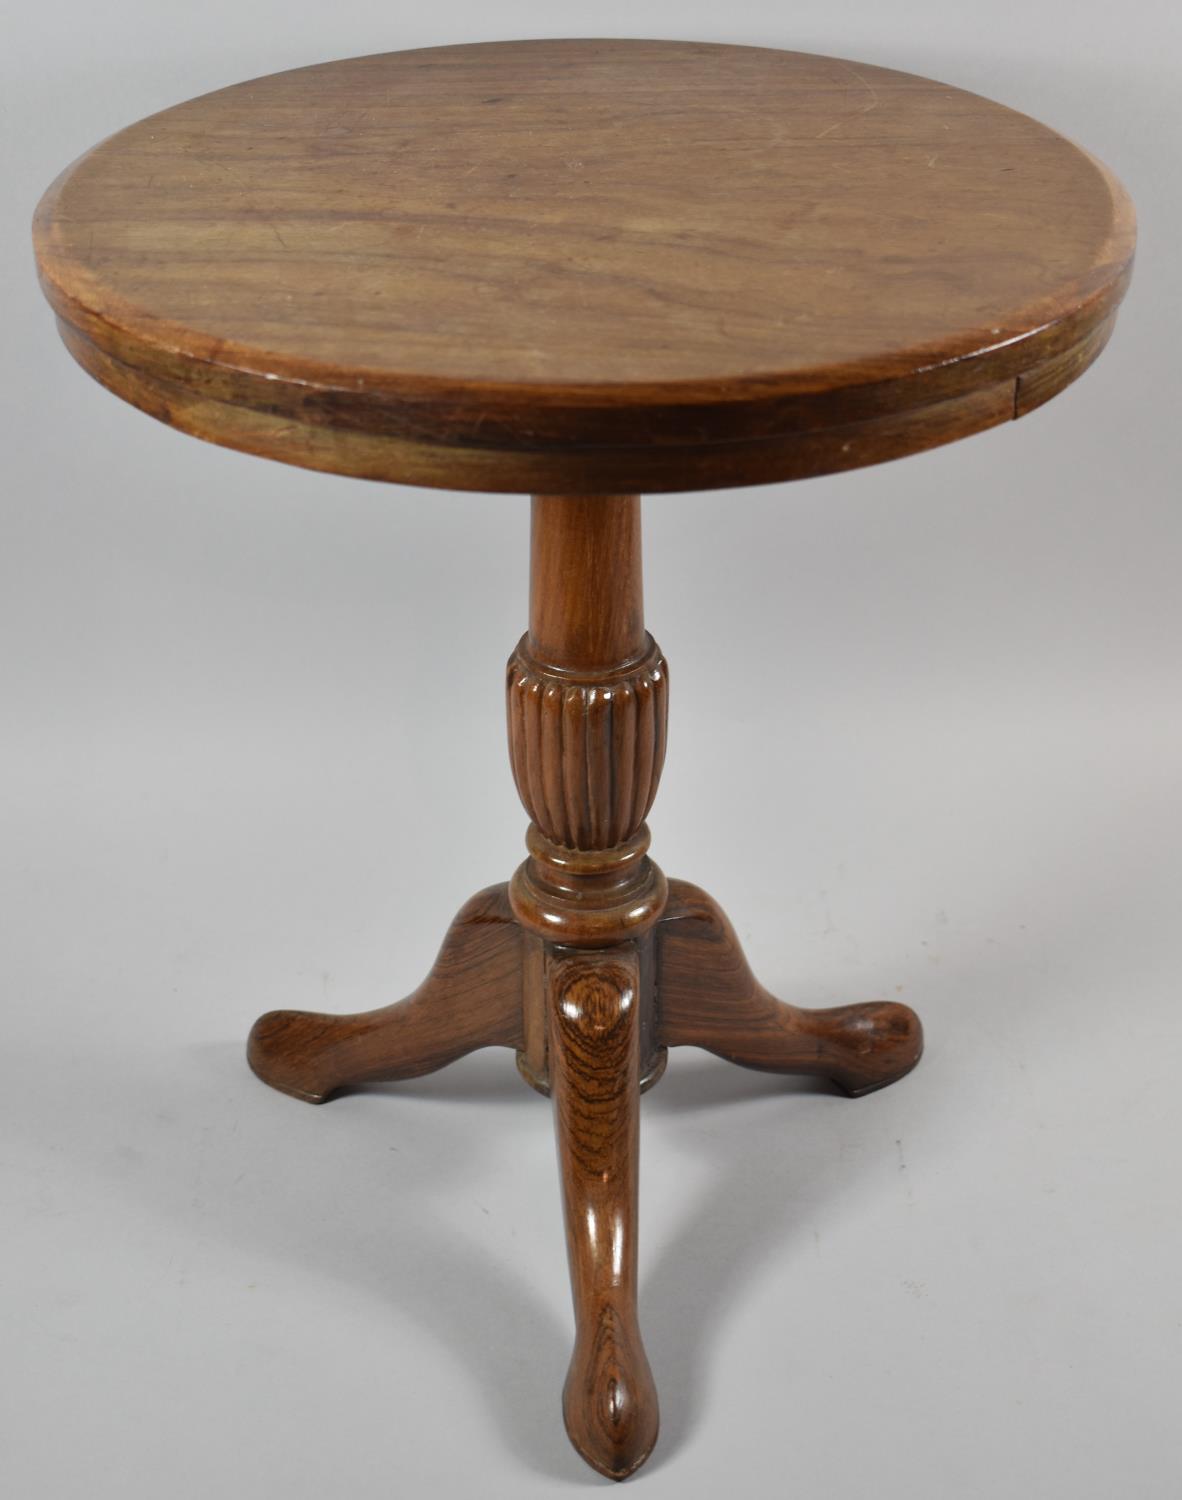 A Circular Topped Wine Table with Reeded Vase Support and Tripod Base, 38cm Diameter